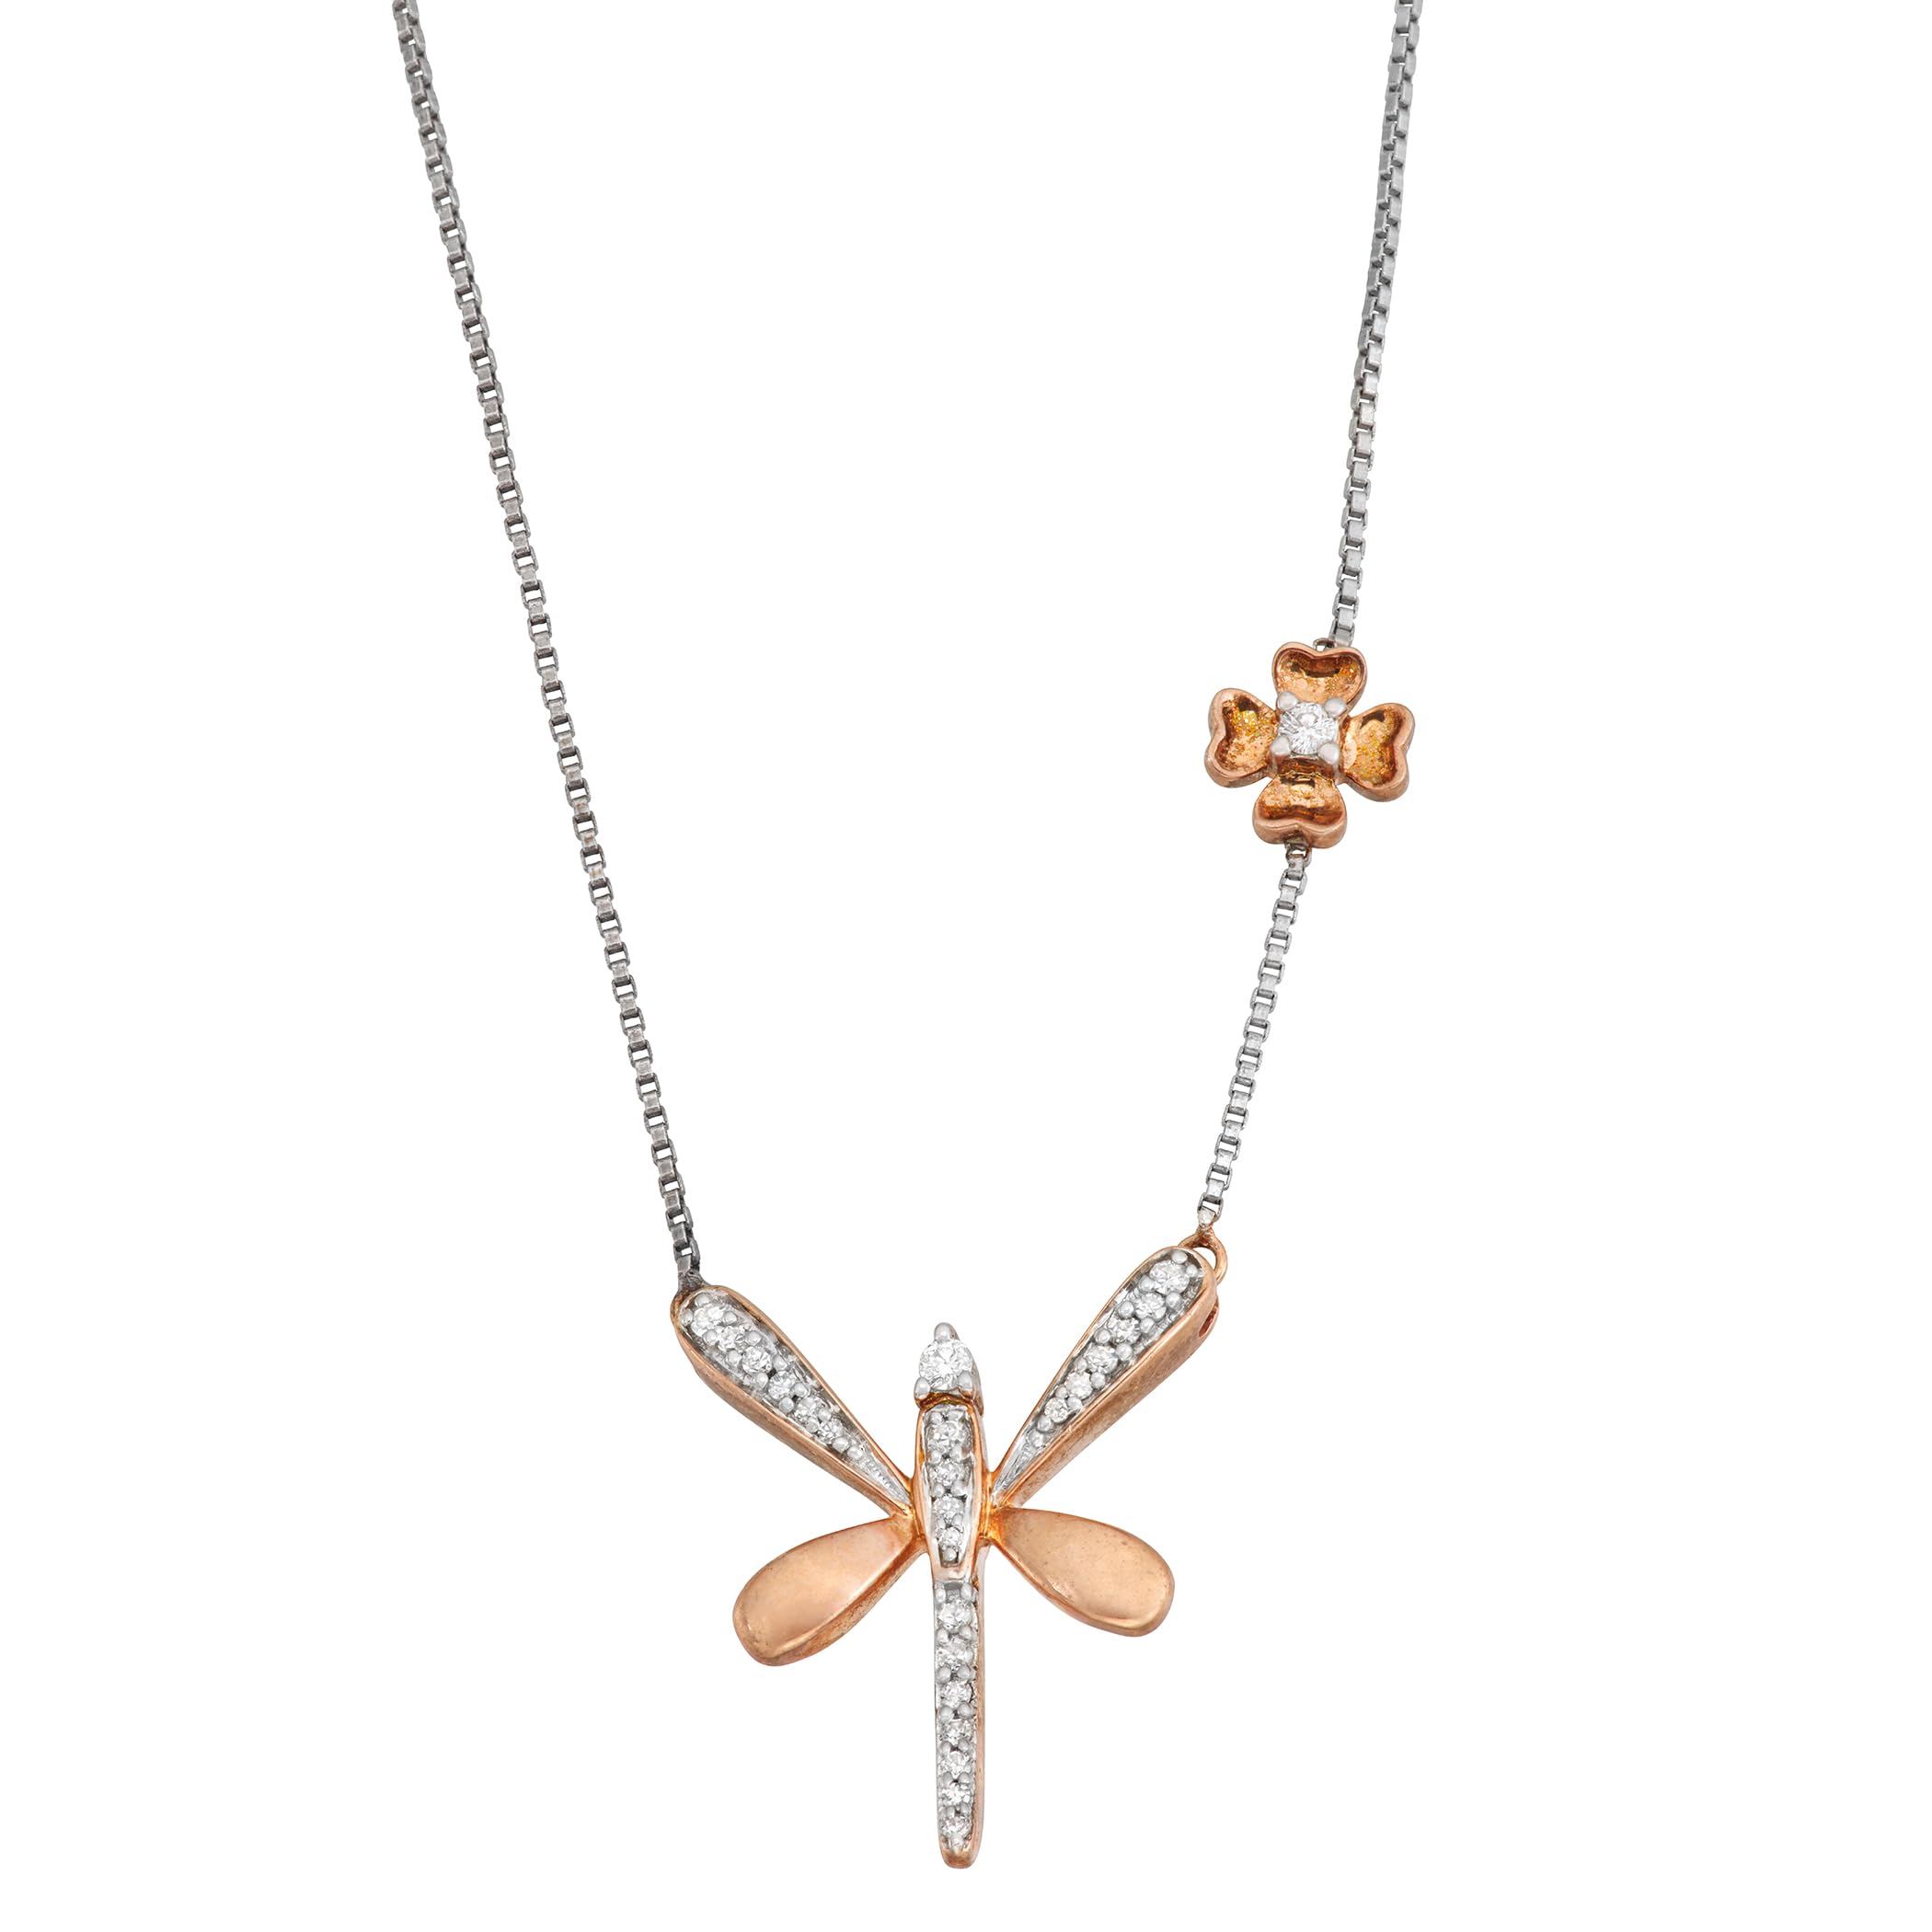 Hdiamonds 1/5 Cttw White Diamond Pendant with a Dragonfly Shaped Pendant Necklace Crafted in Rose Gold Plated Sterling Silver for Women, Girls, 18